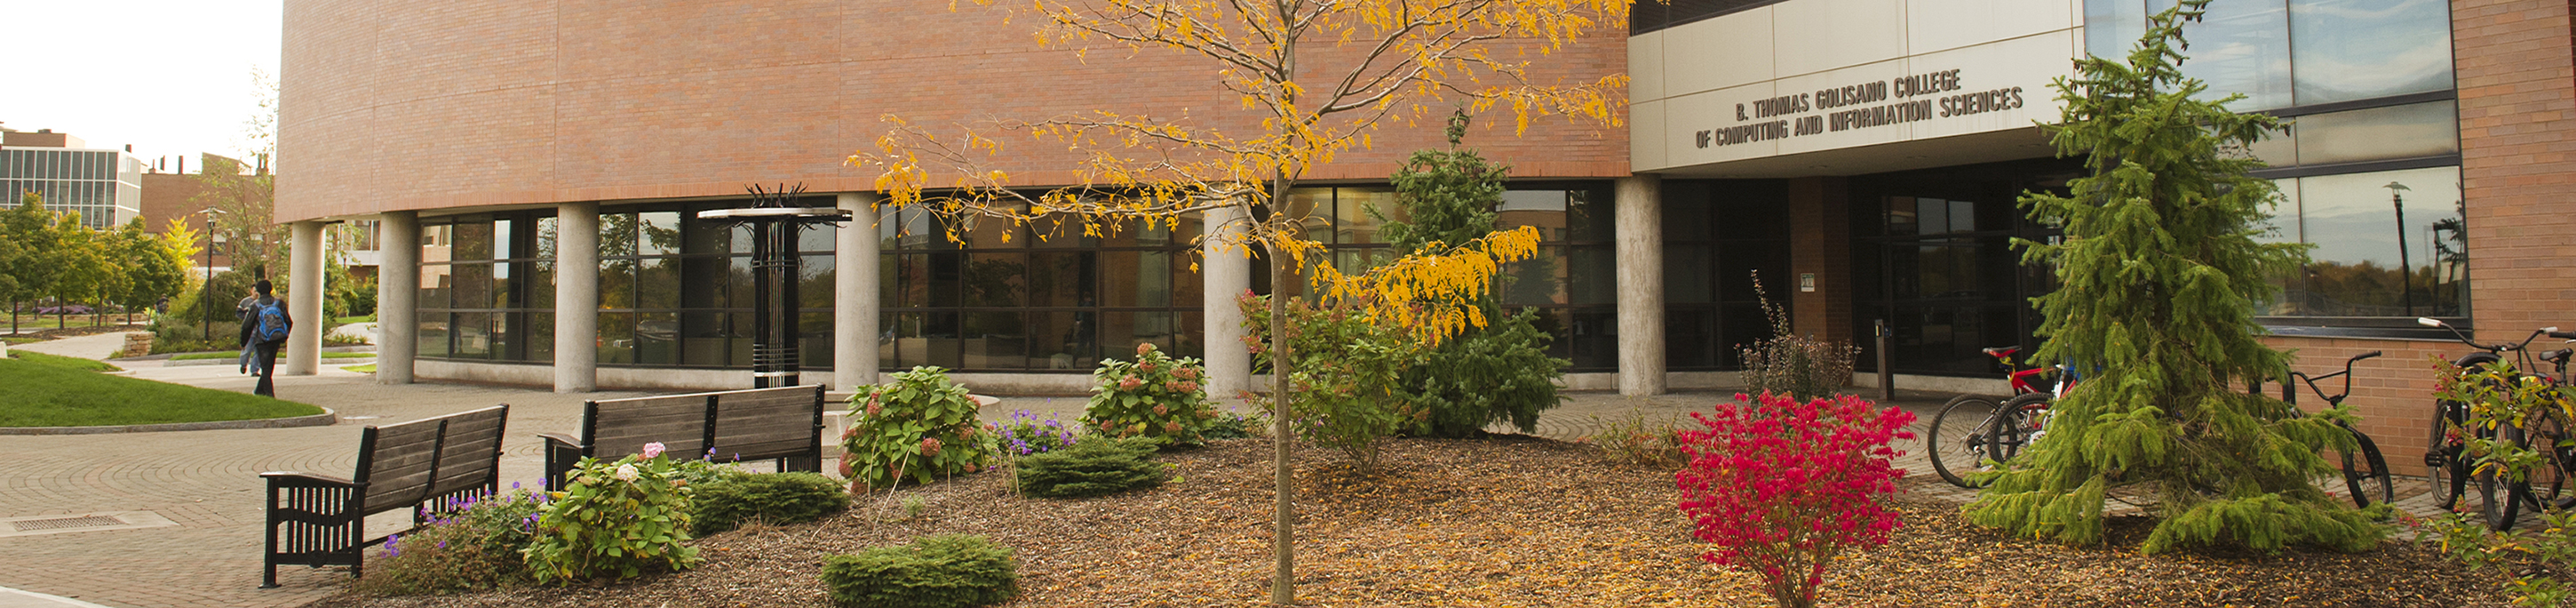 image of the B. Thomas Golisano College of Computing and Information Sciences building in fall